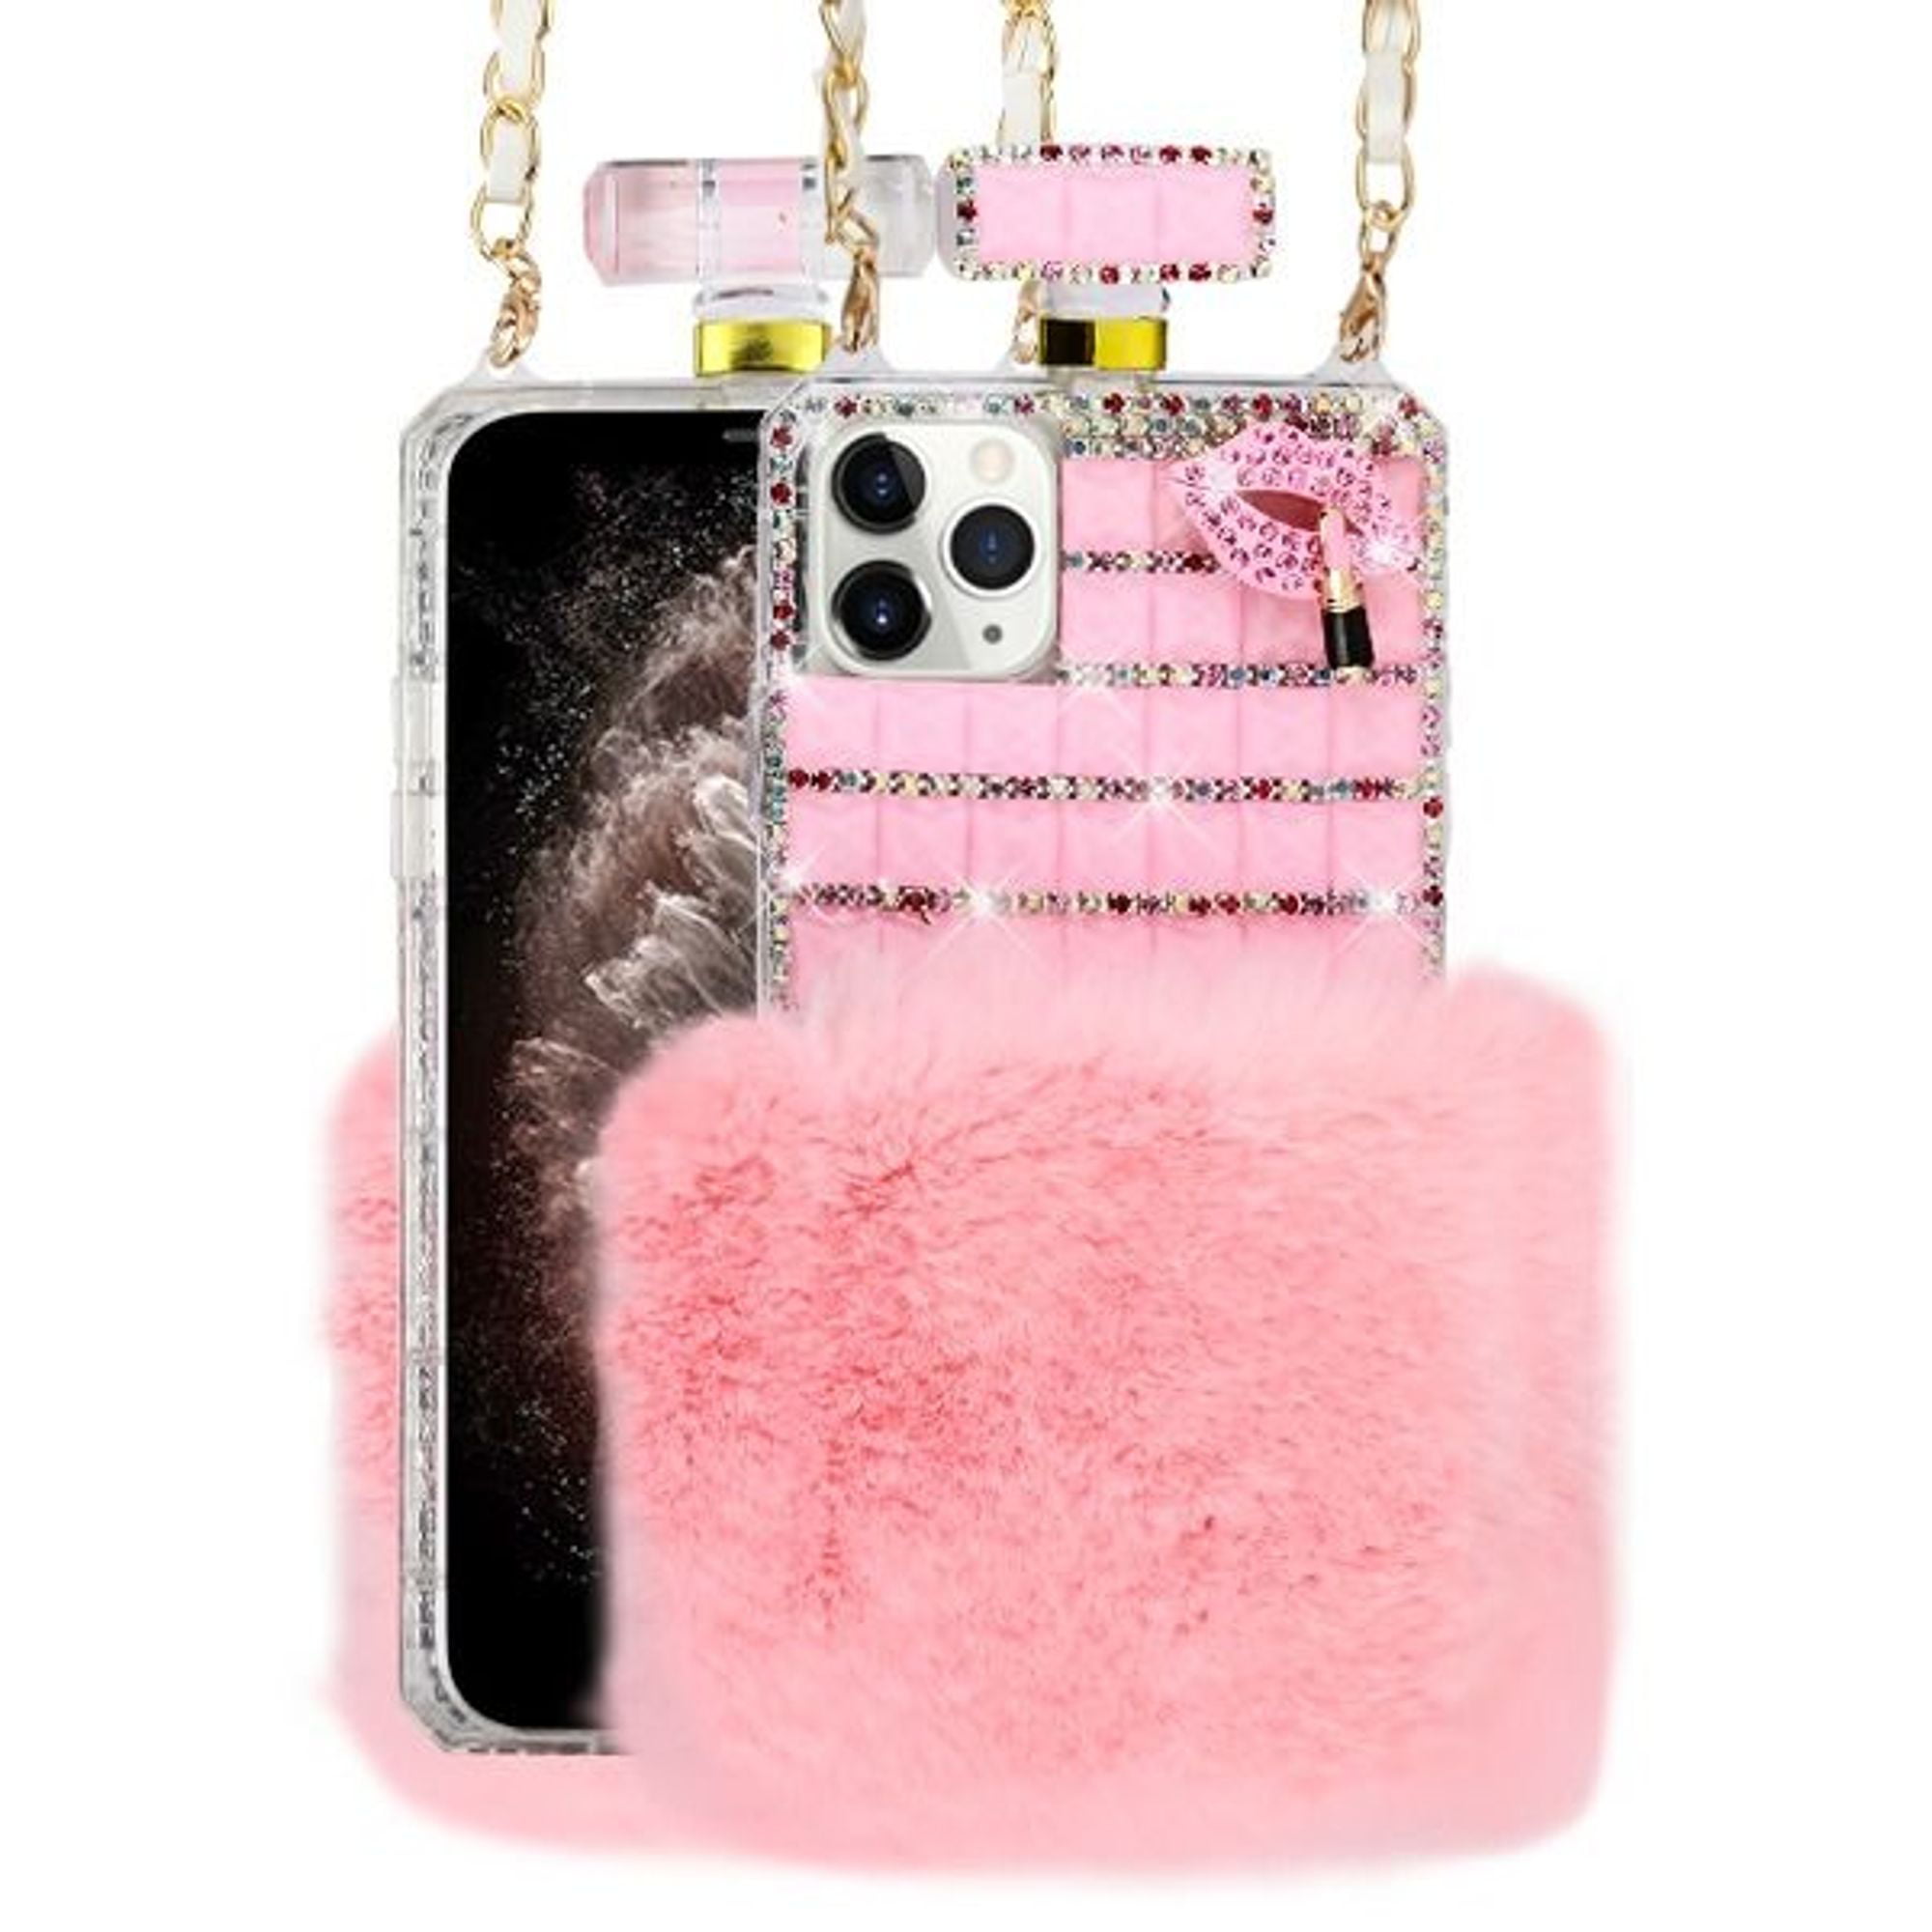 For Apple iPhone 11 Pro Max Case, by Insten Cute Plush with Chain